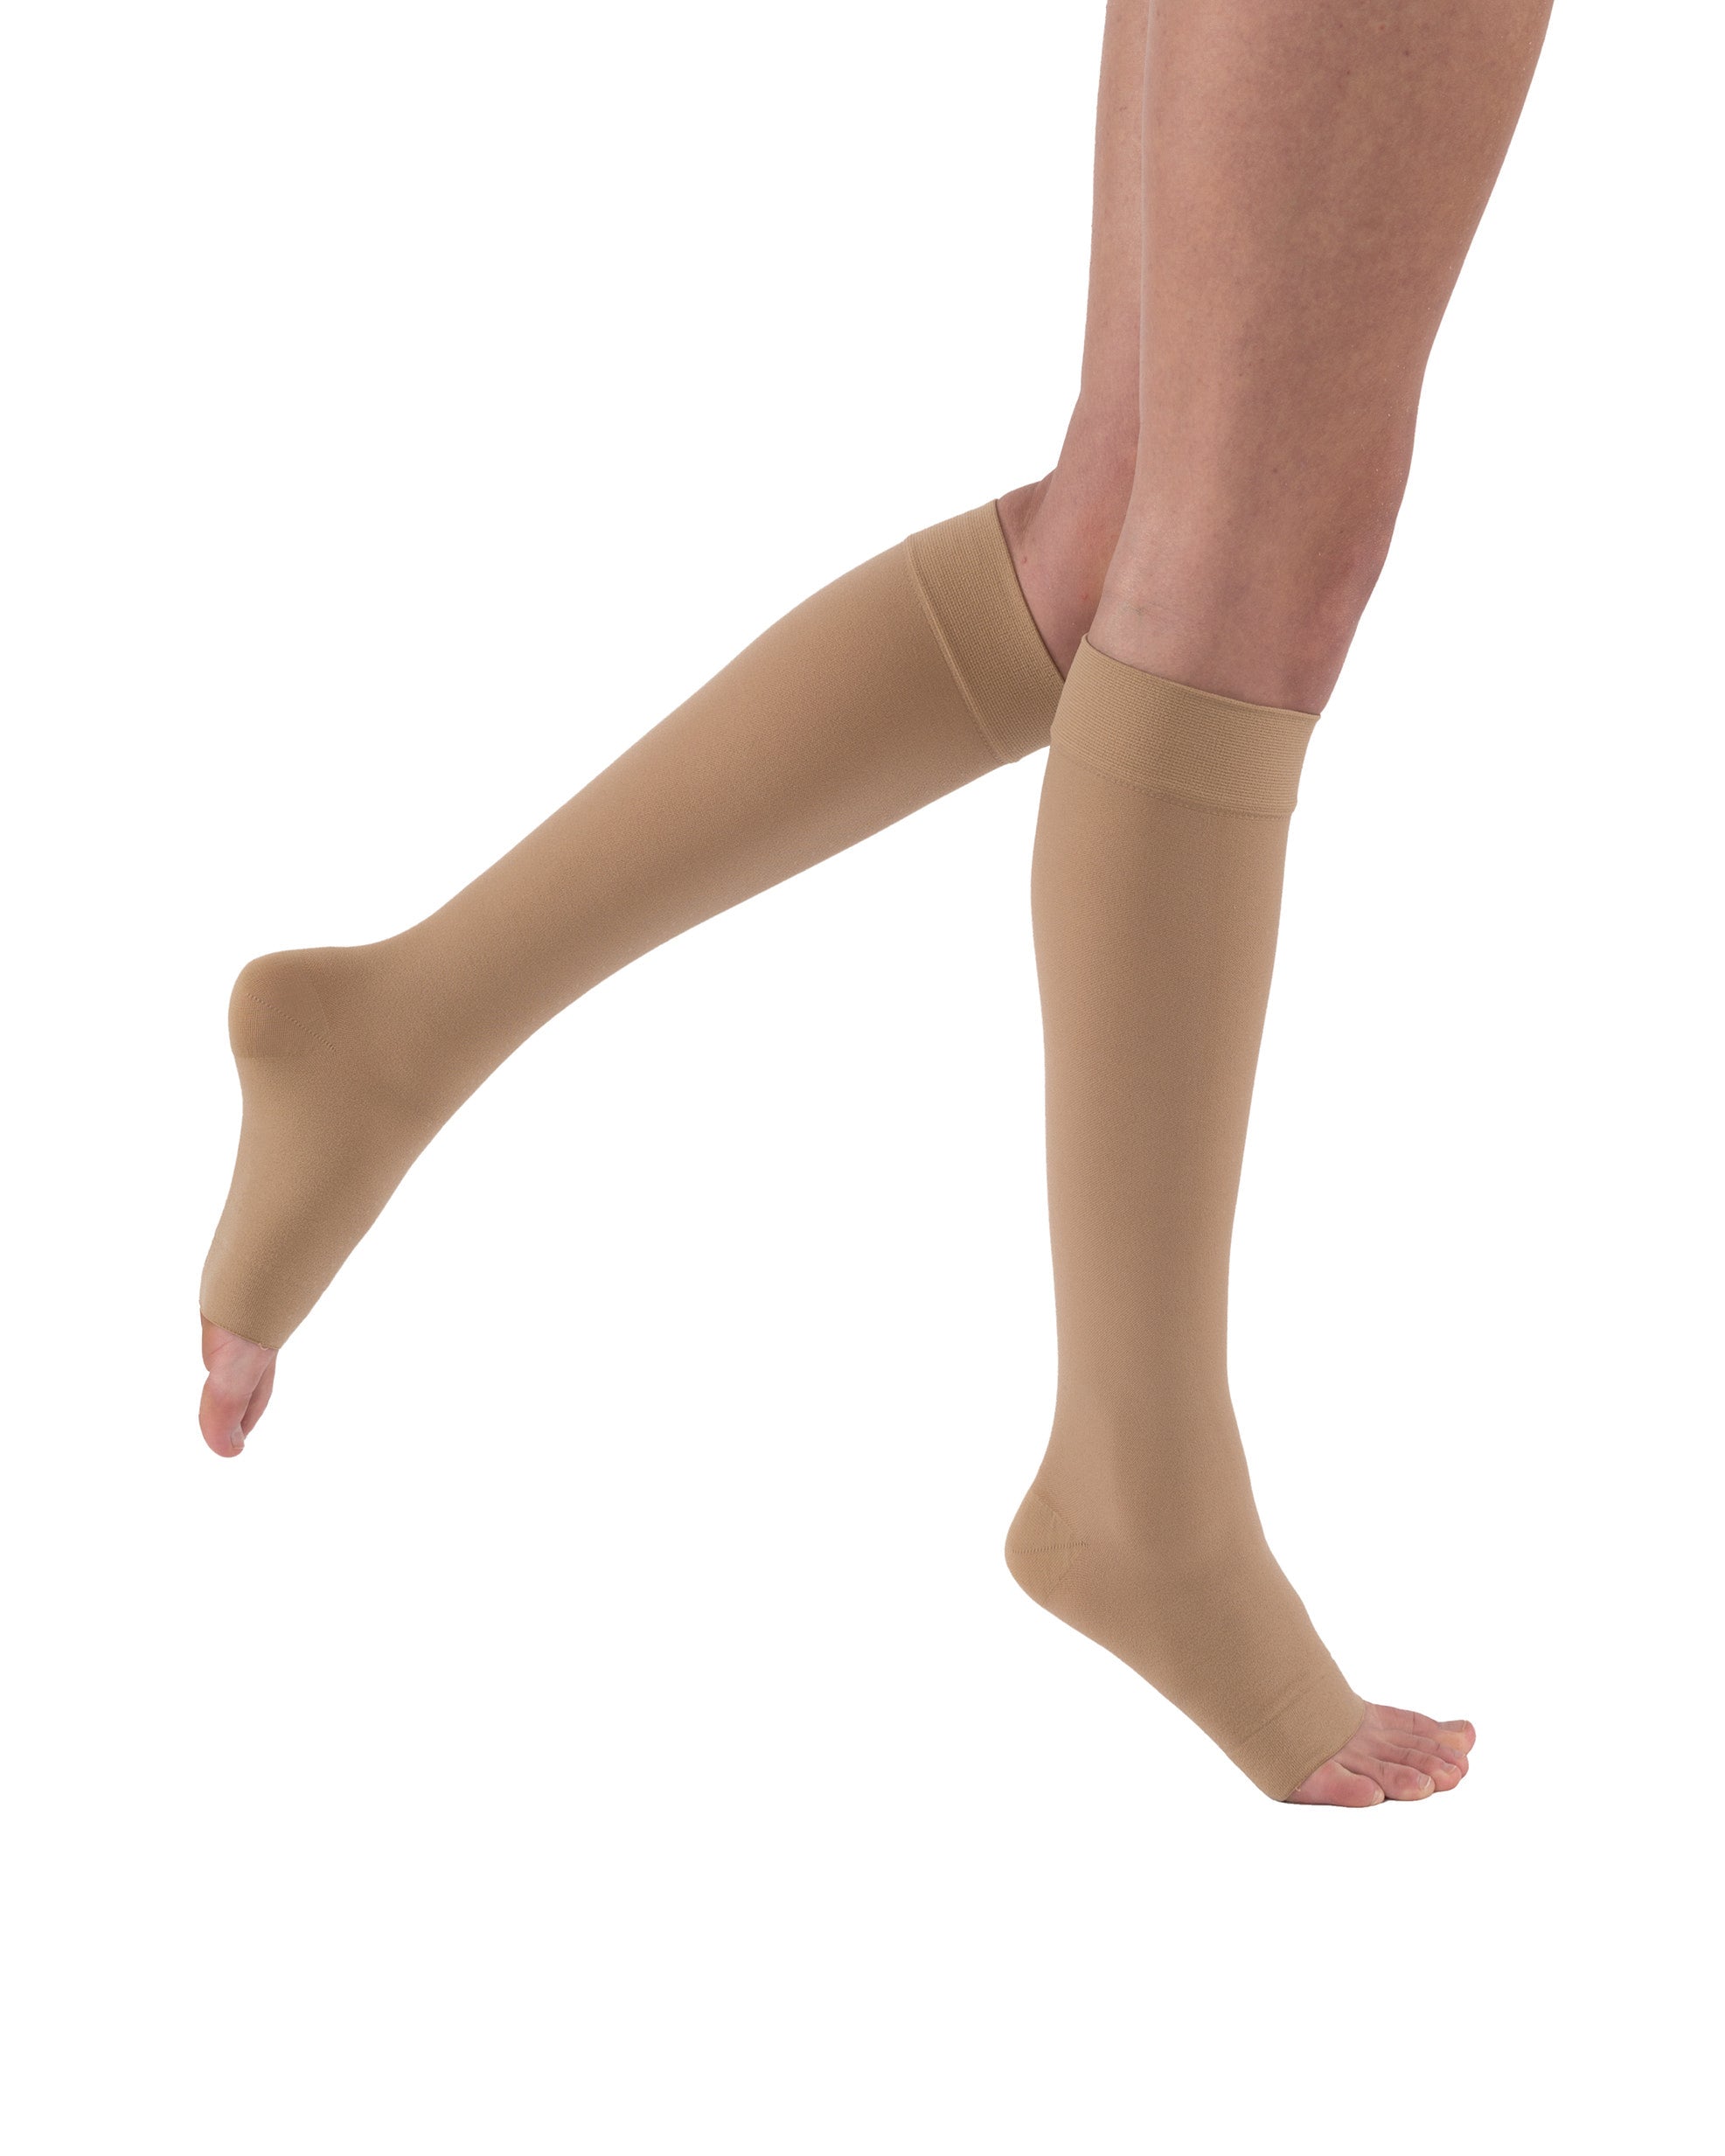 JOBST Relief Compression Stockings 15-20 mmHg Knee High